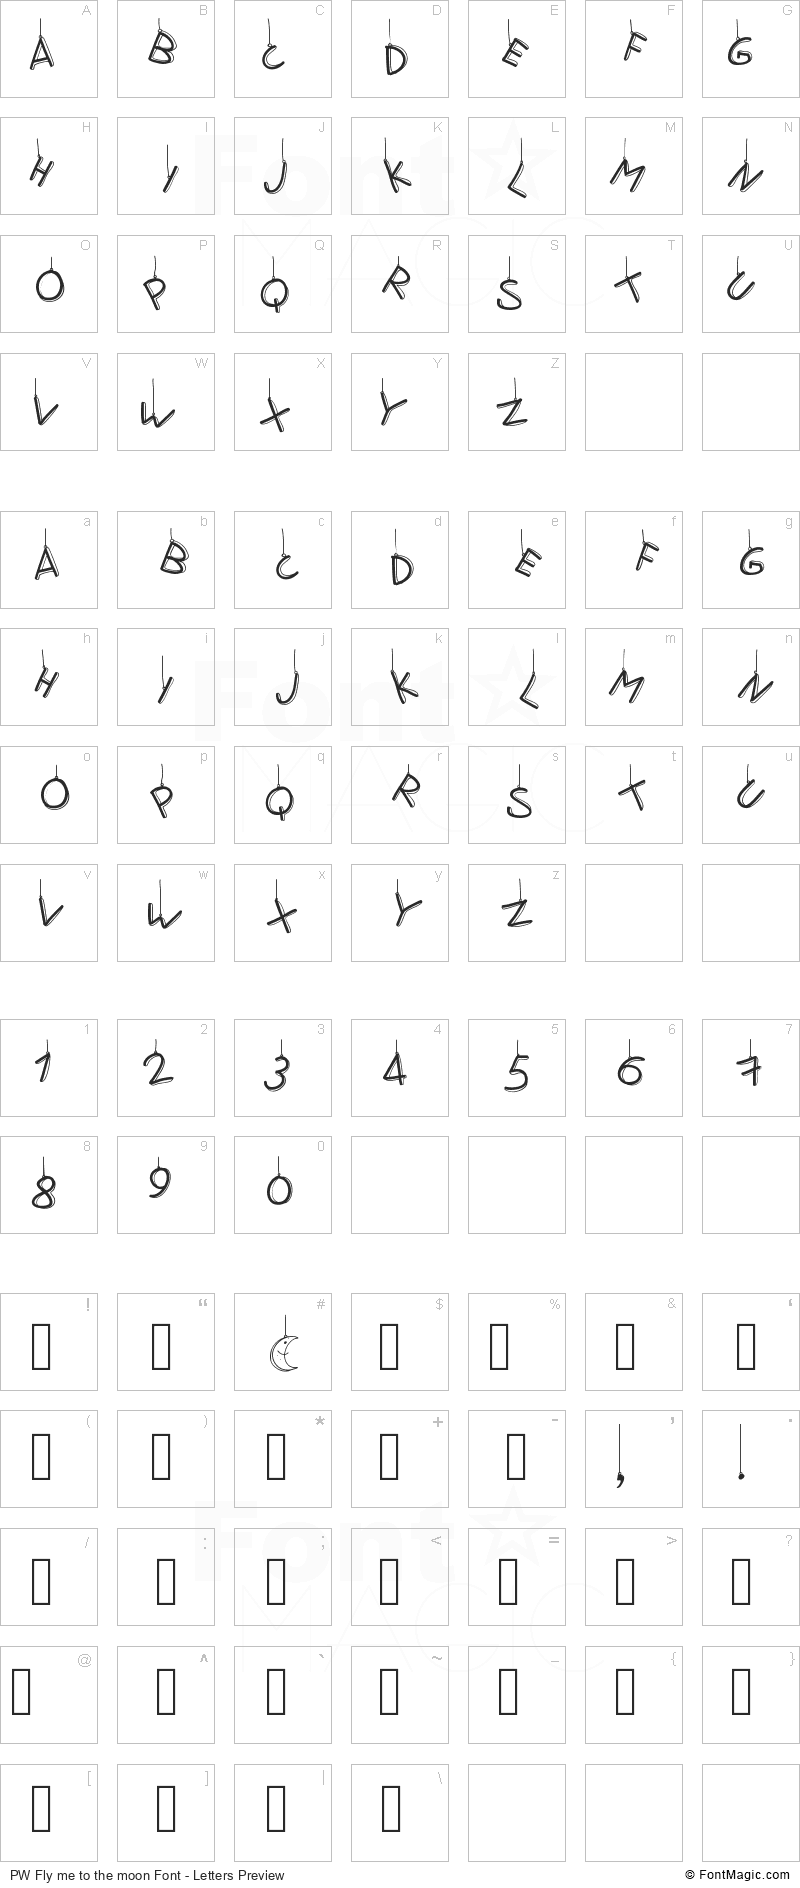 PW Fly me to the moon Font - All Latters Preview Chart